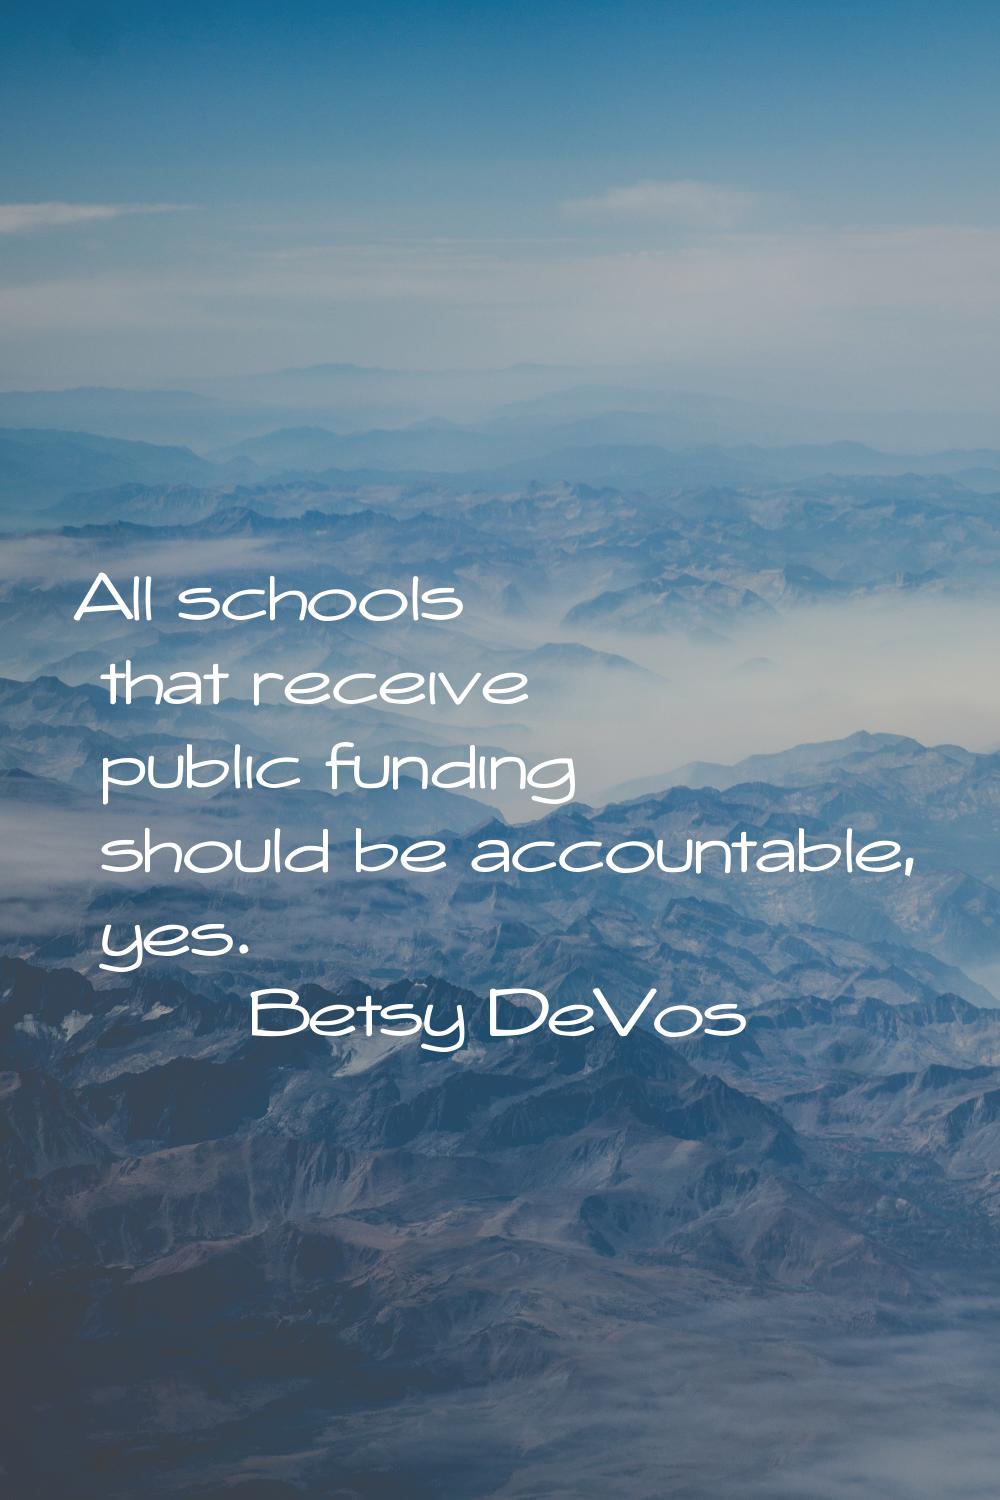 All schools that receive public funding should be accountable, yes.